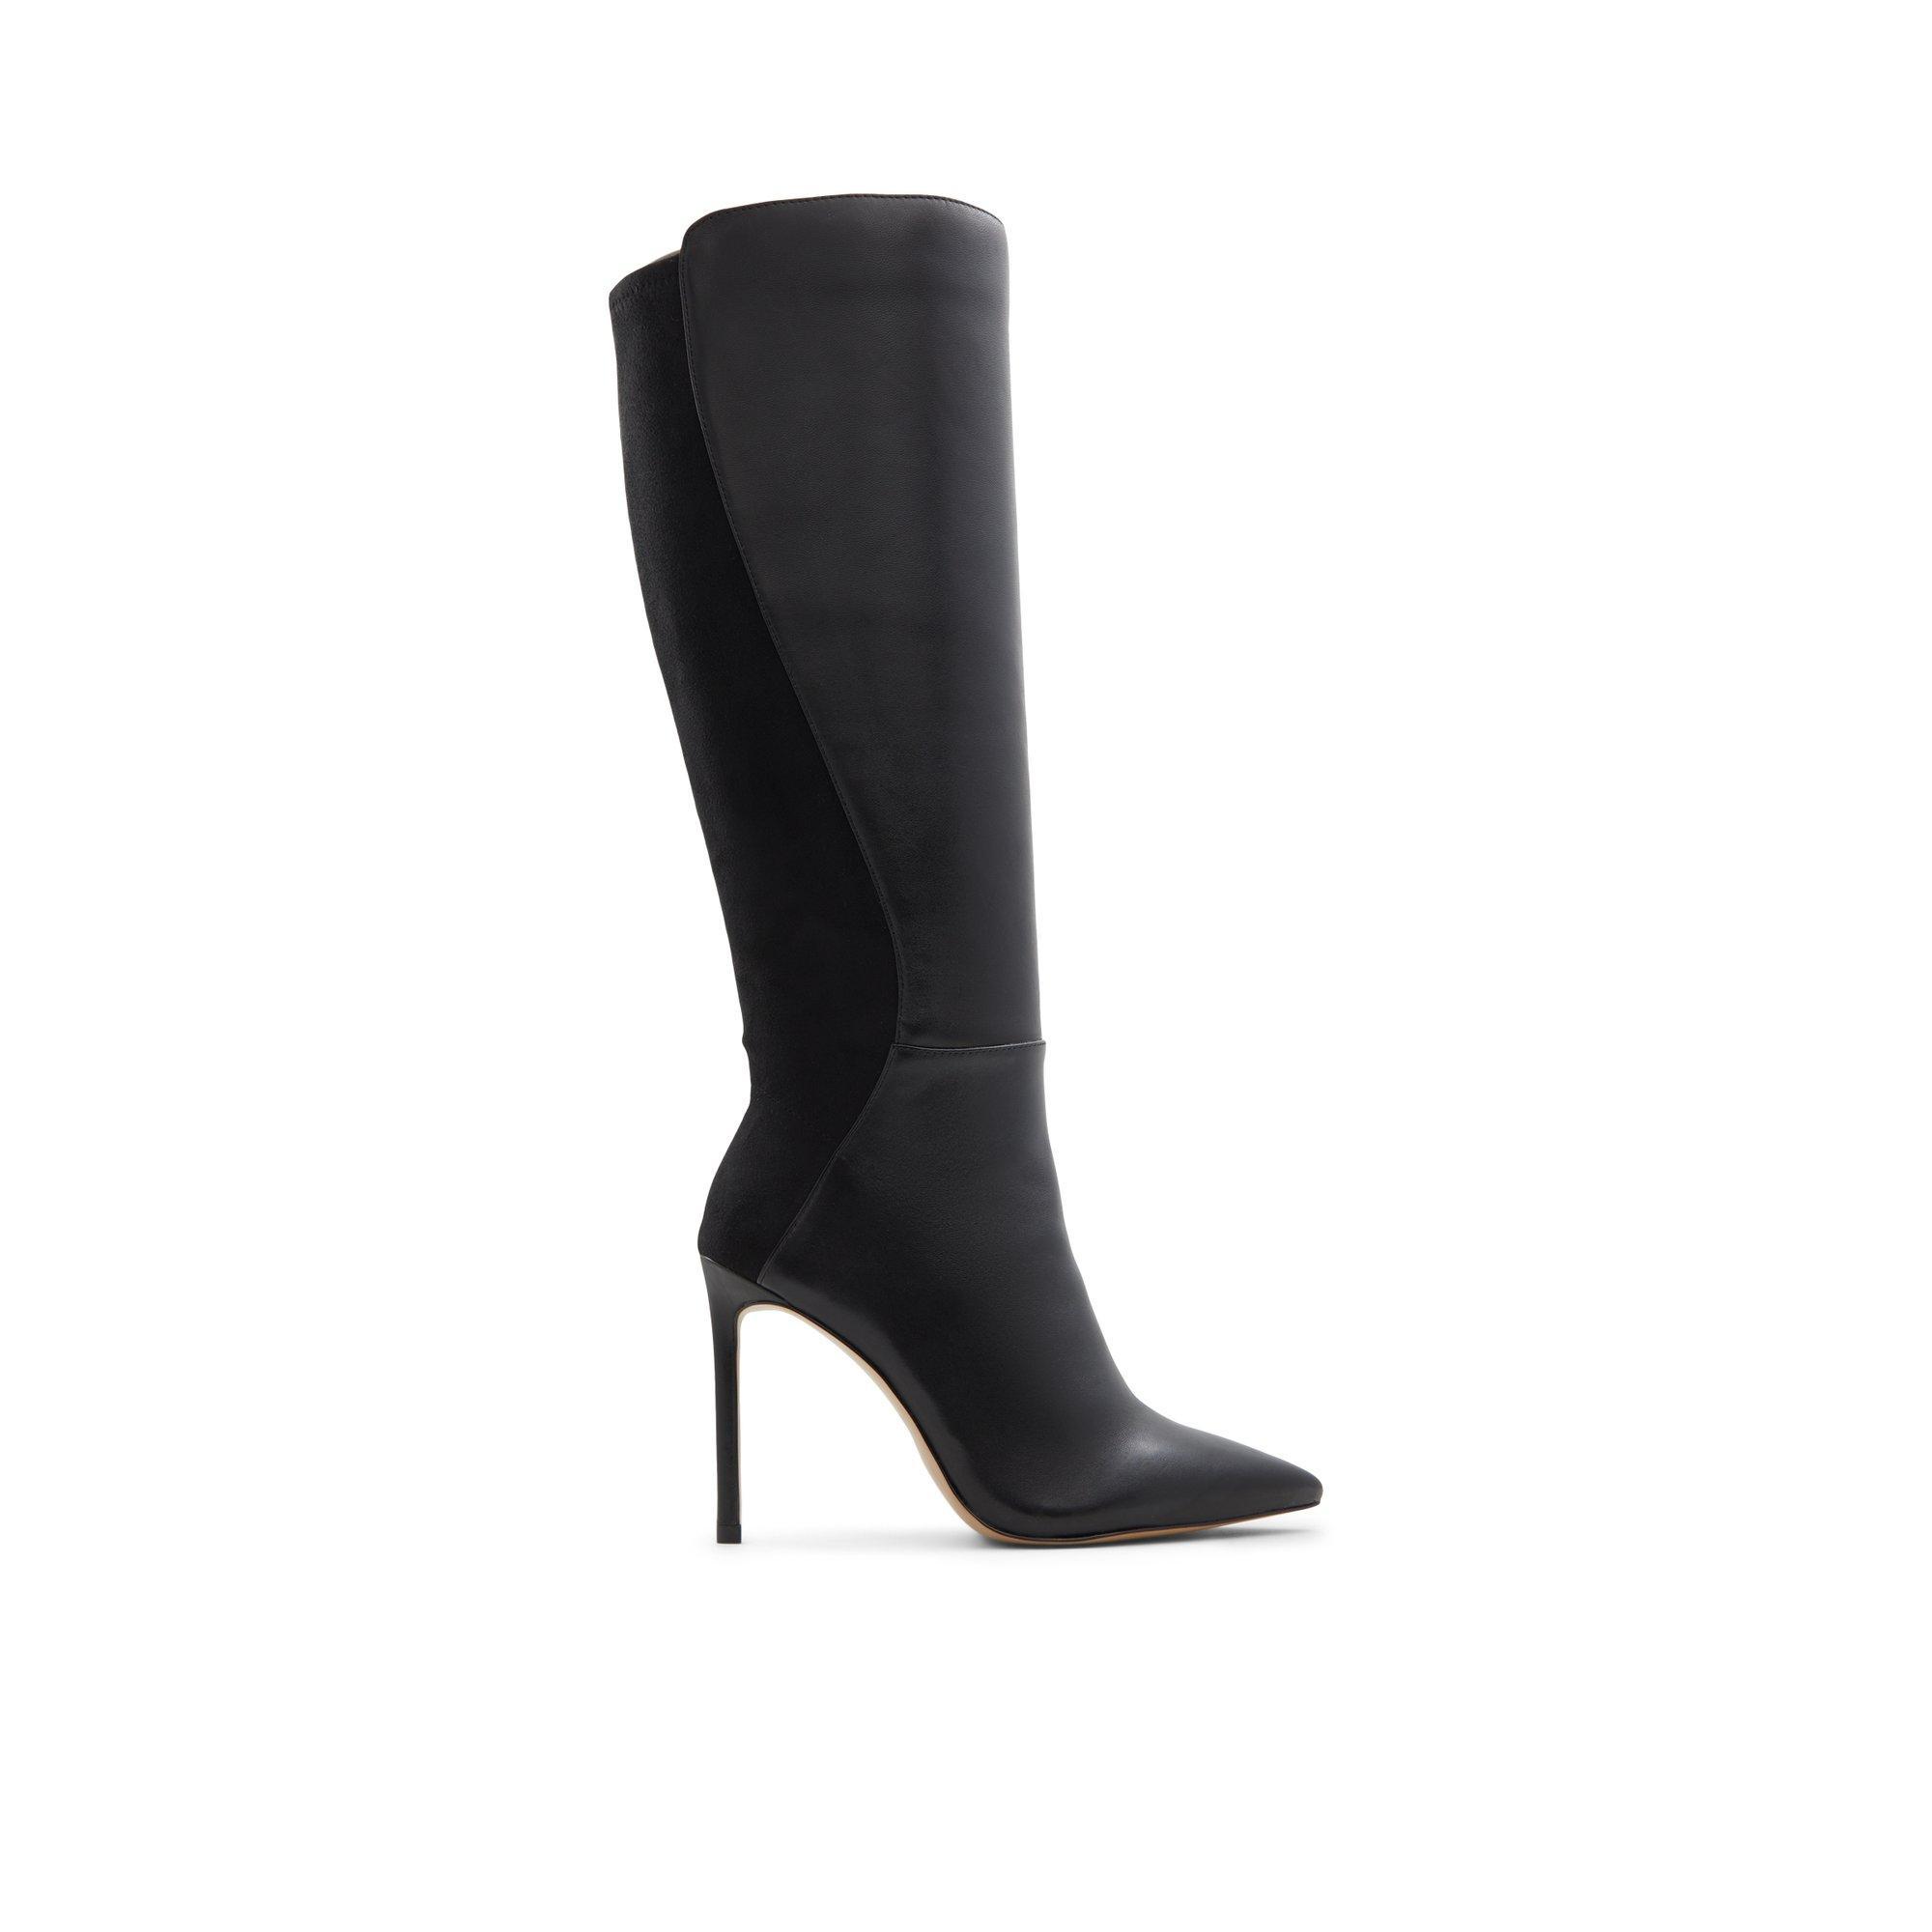 ALDO Milann Pointed Toe Knee High Boot Product Image